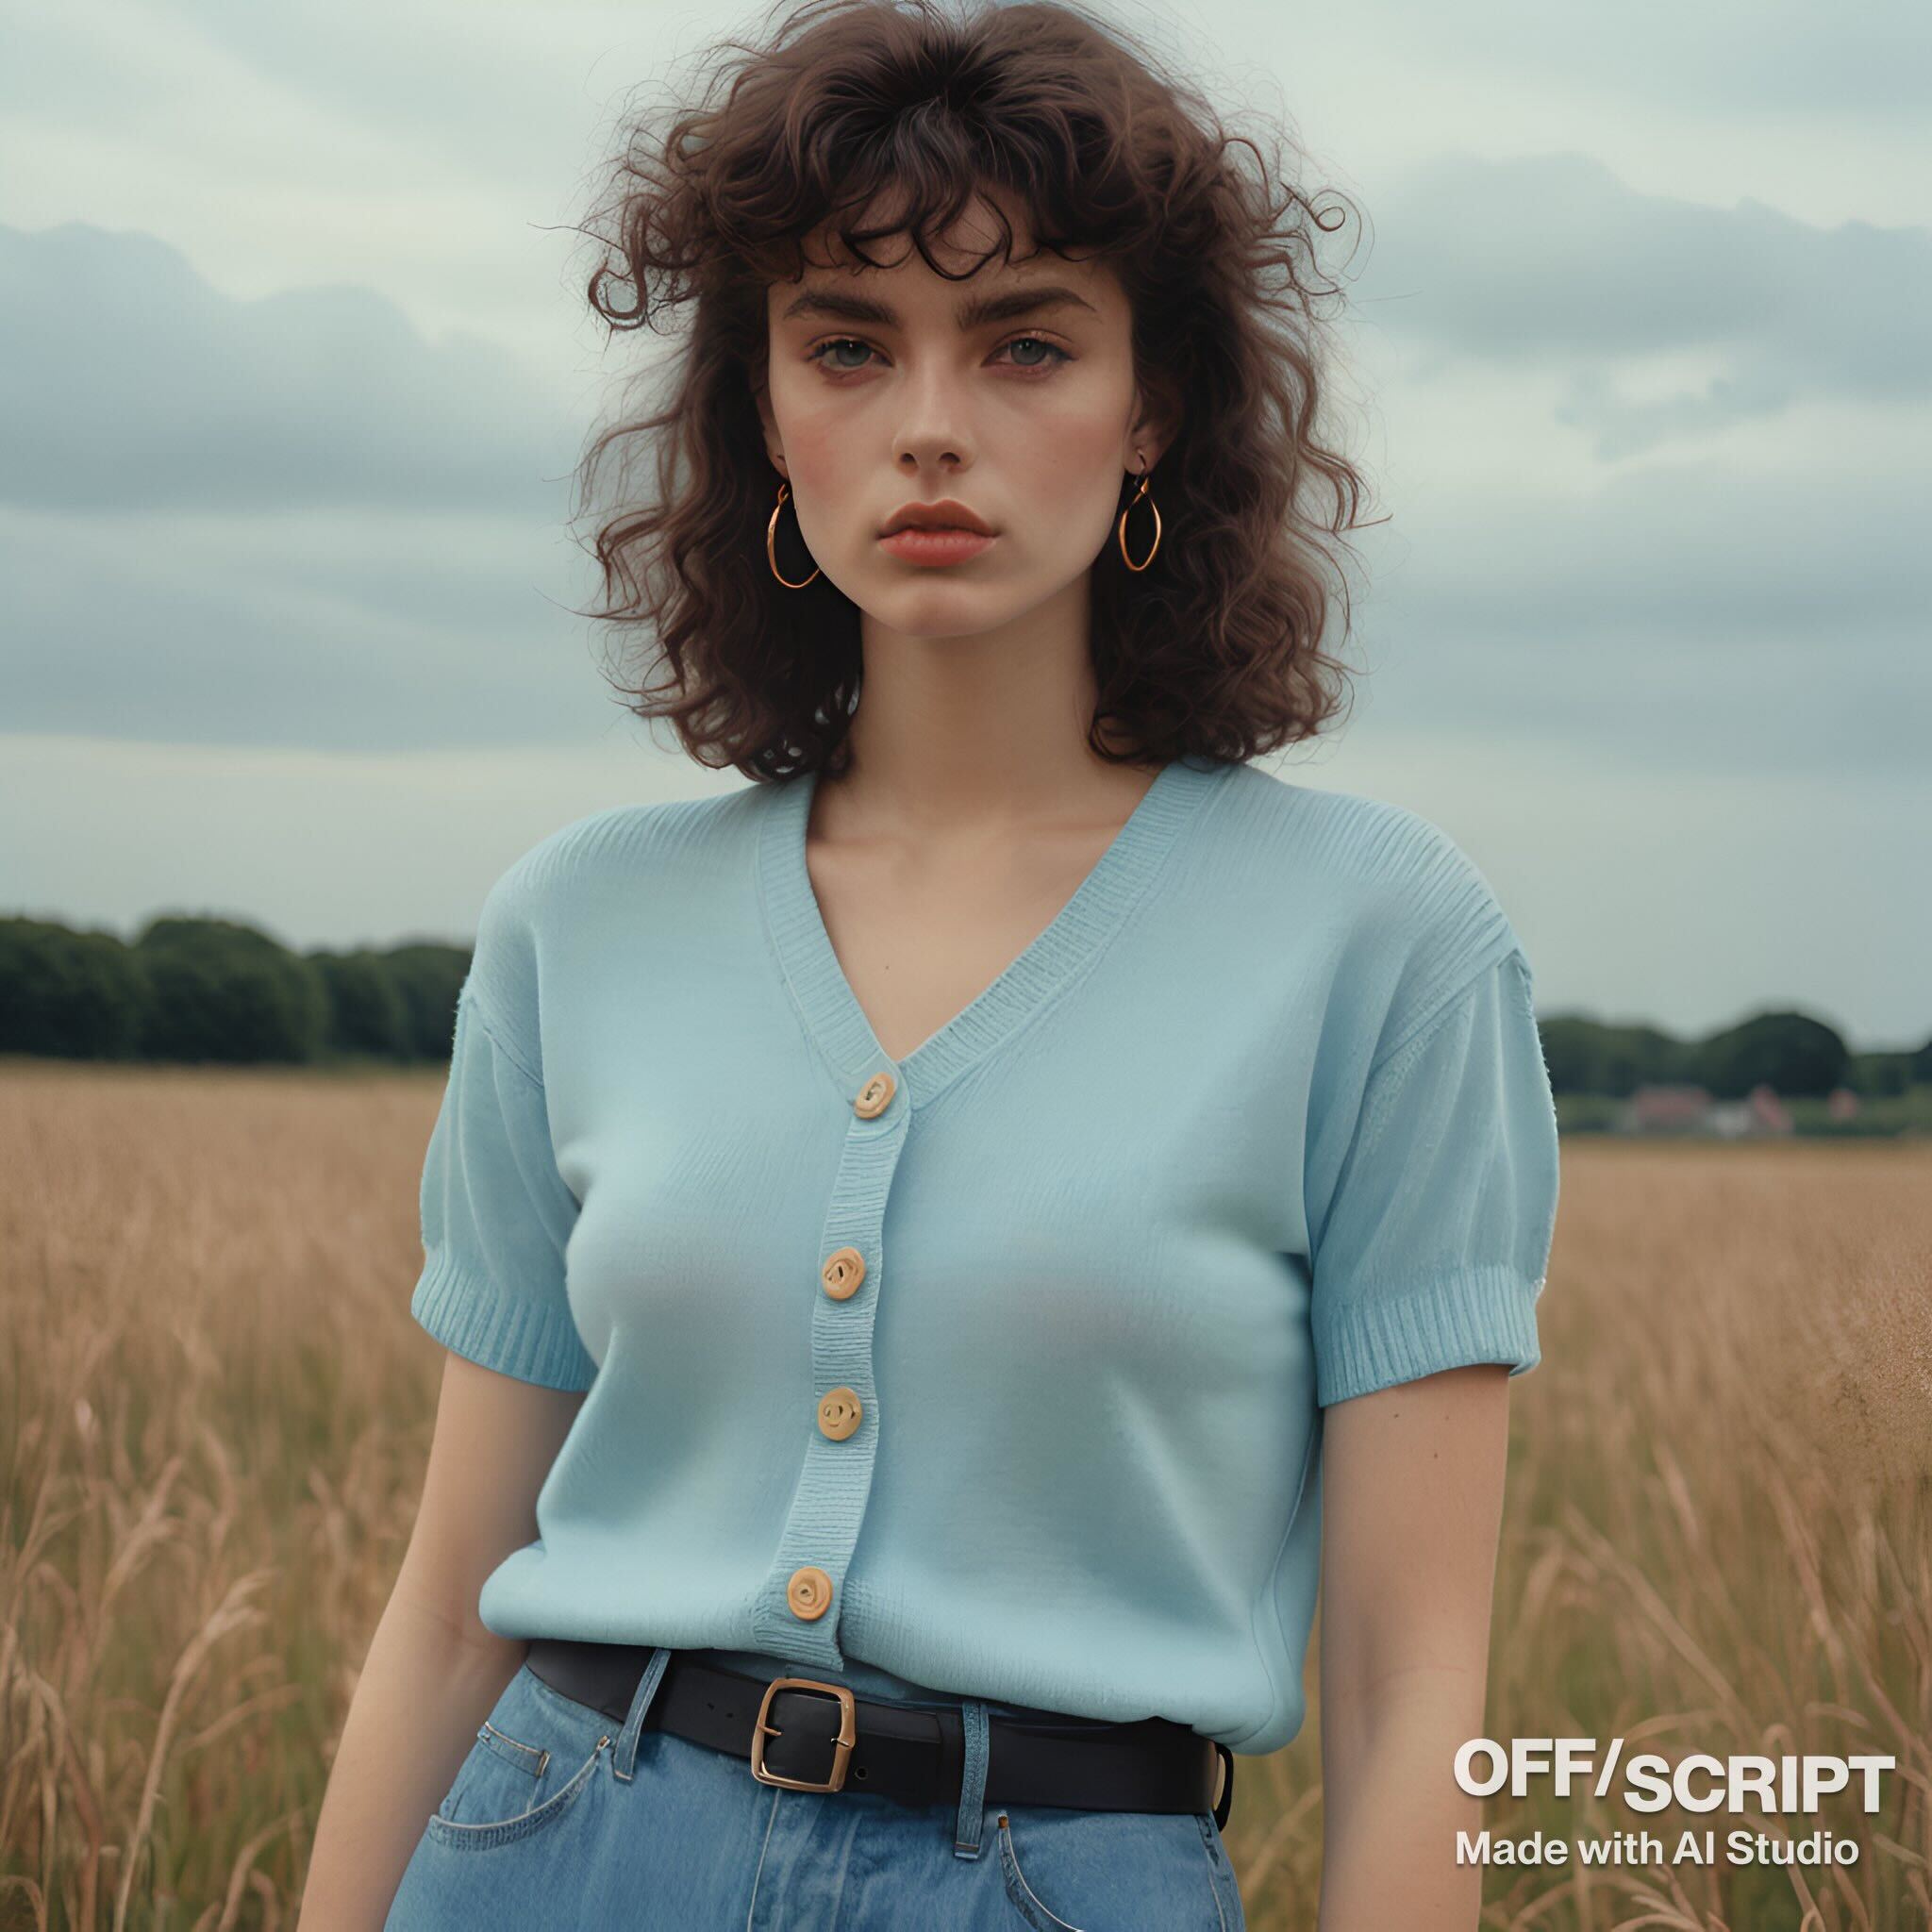 Knitted buttoned up t-shirt with 80s vibes. Pastel blue. Beautiful model. Product shot. Vintage